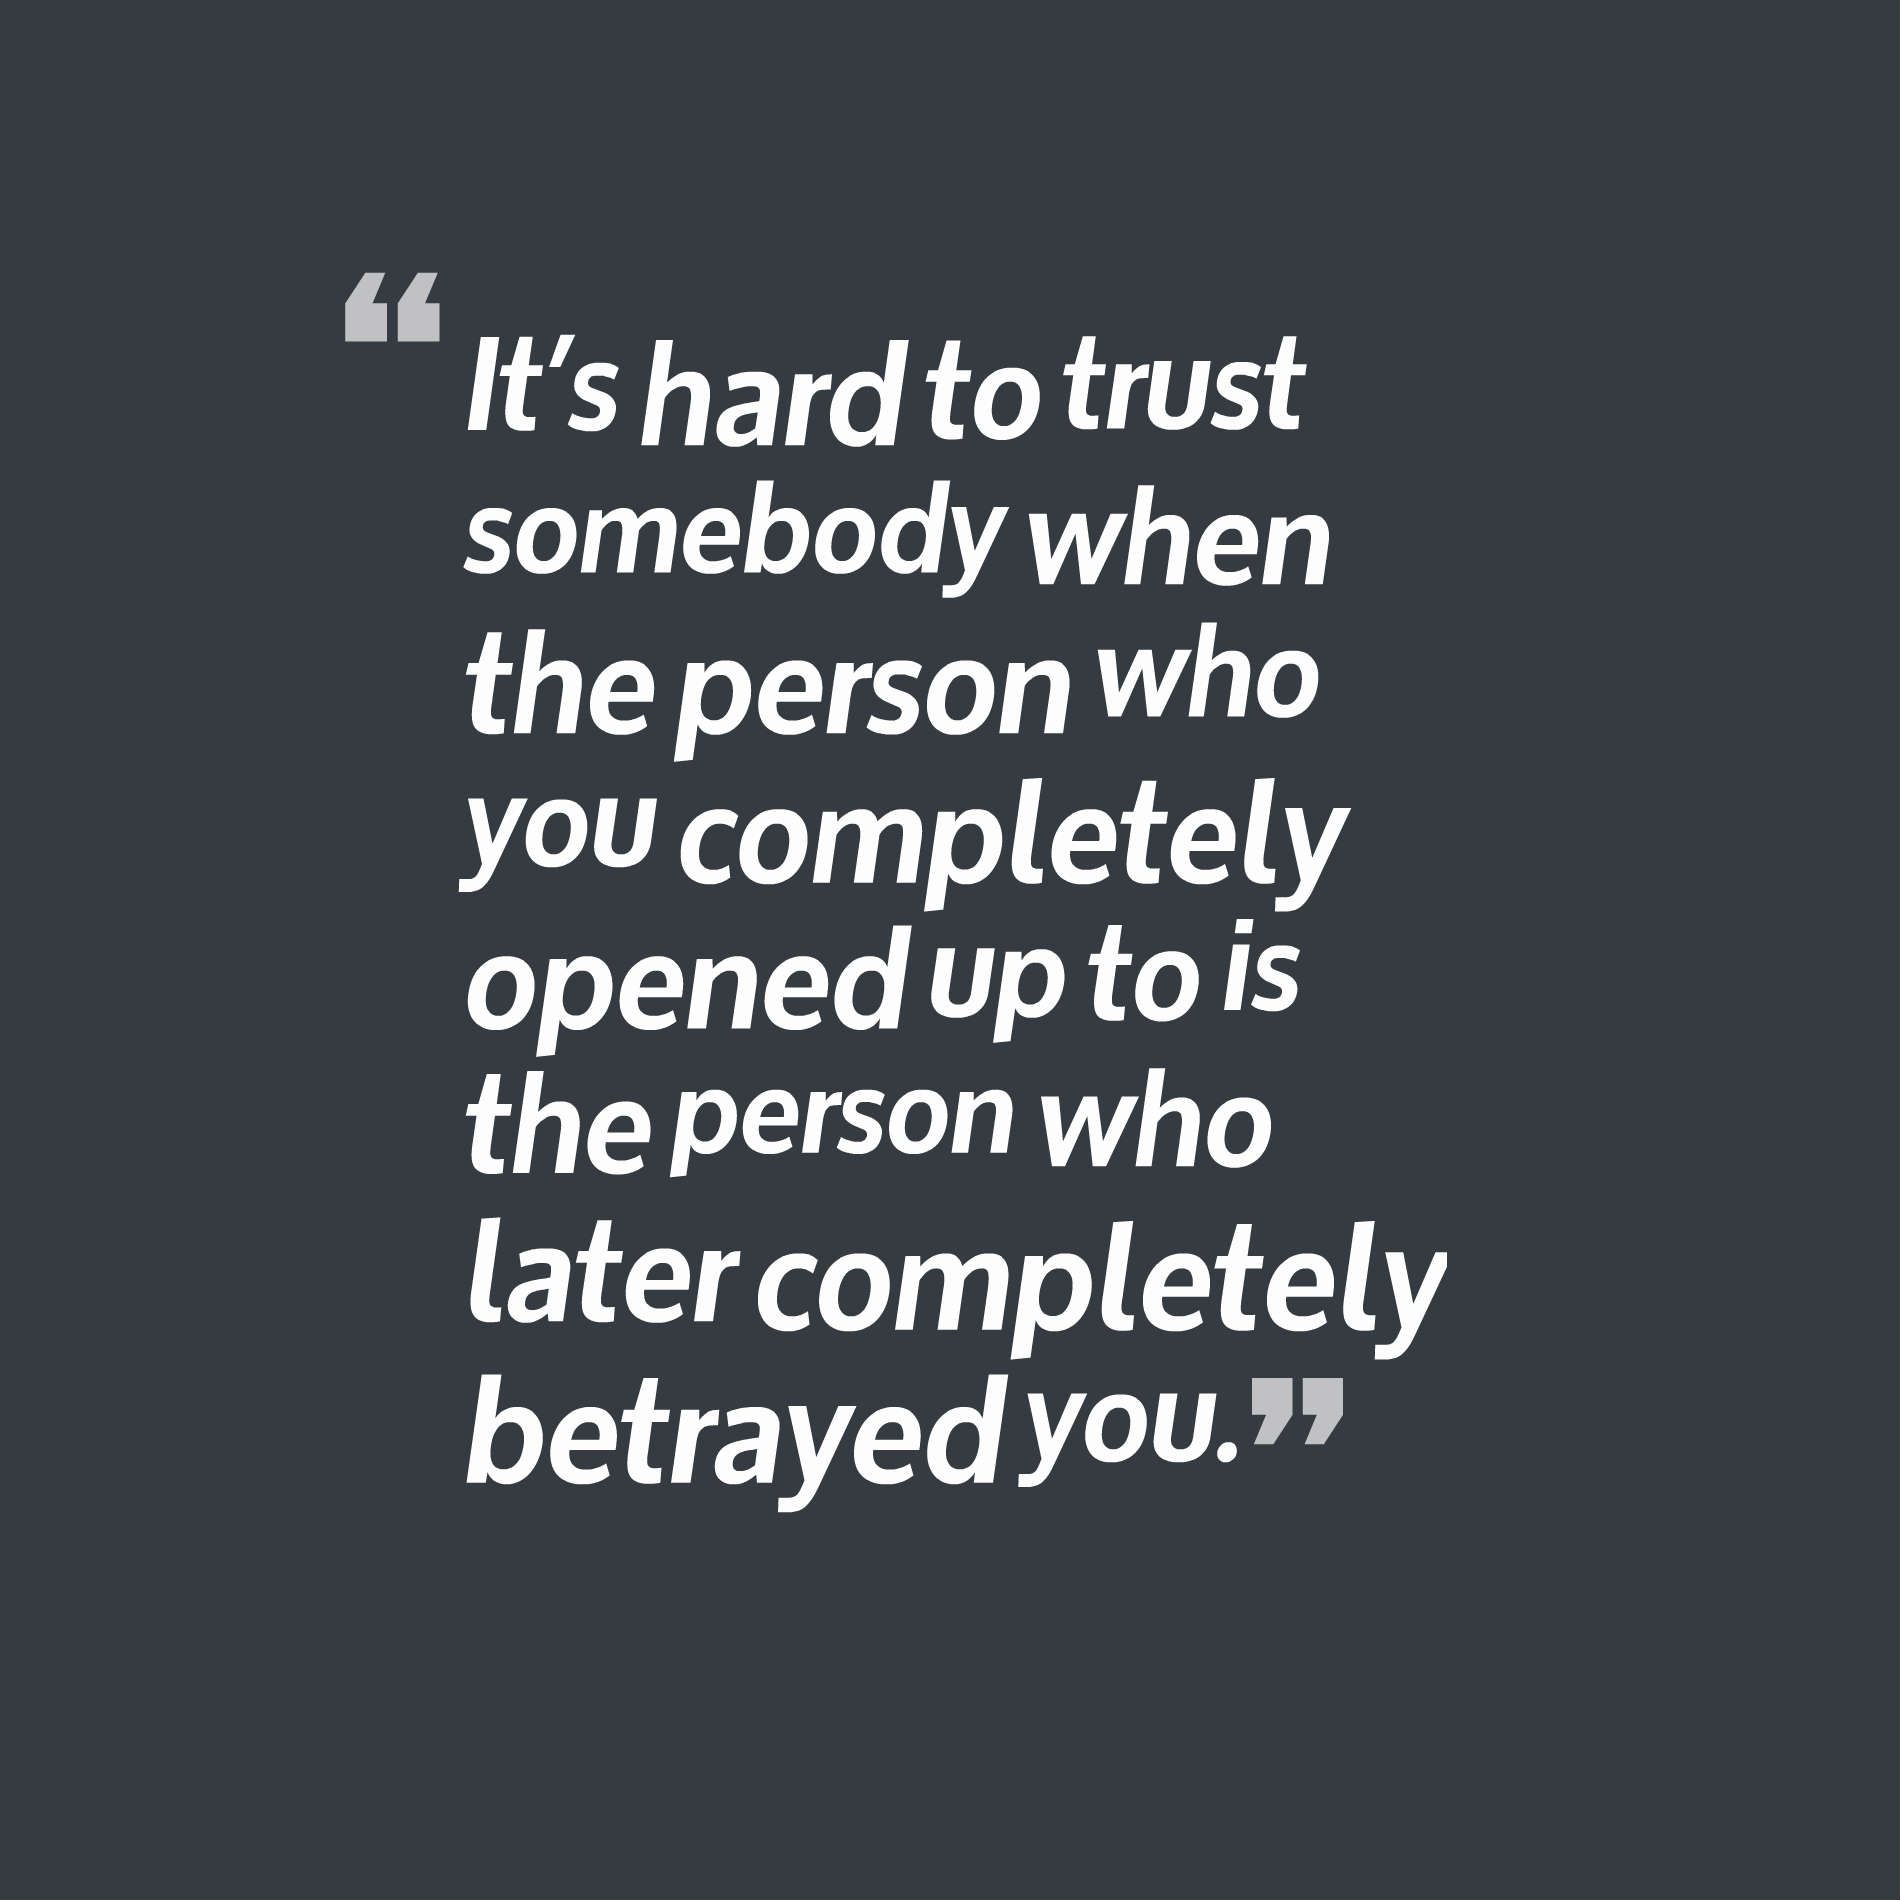 It’s hard to trust somebody when the person who you completely opened up to is the person who later completely betrayed you.